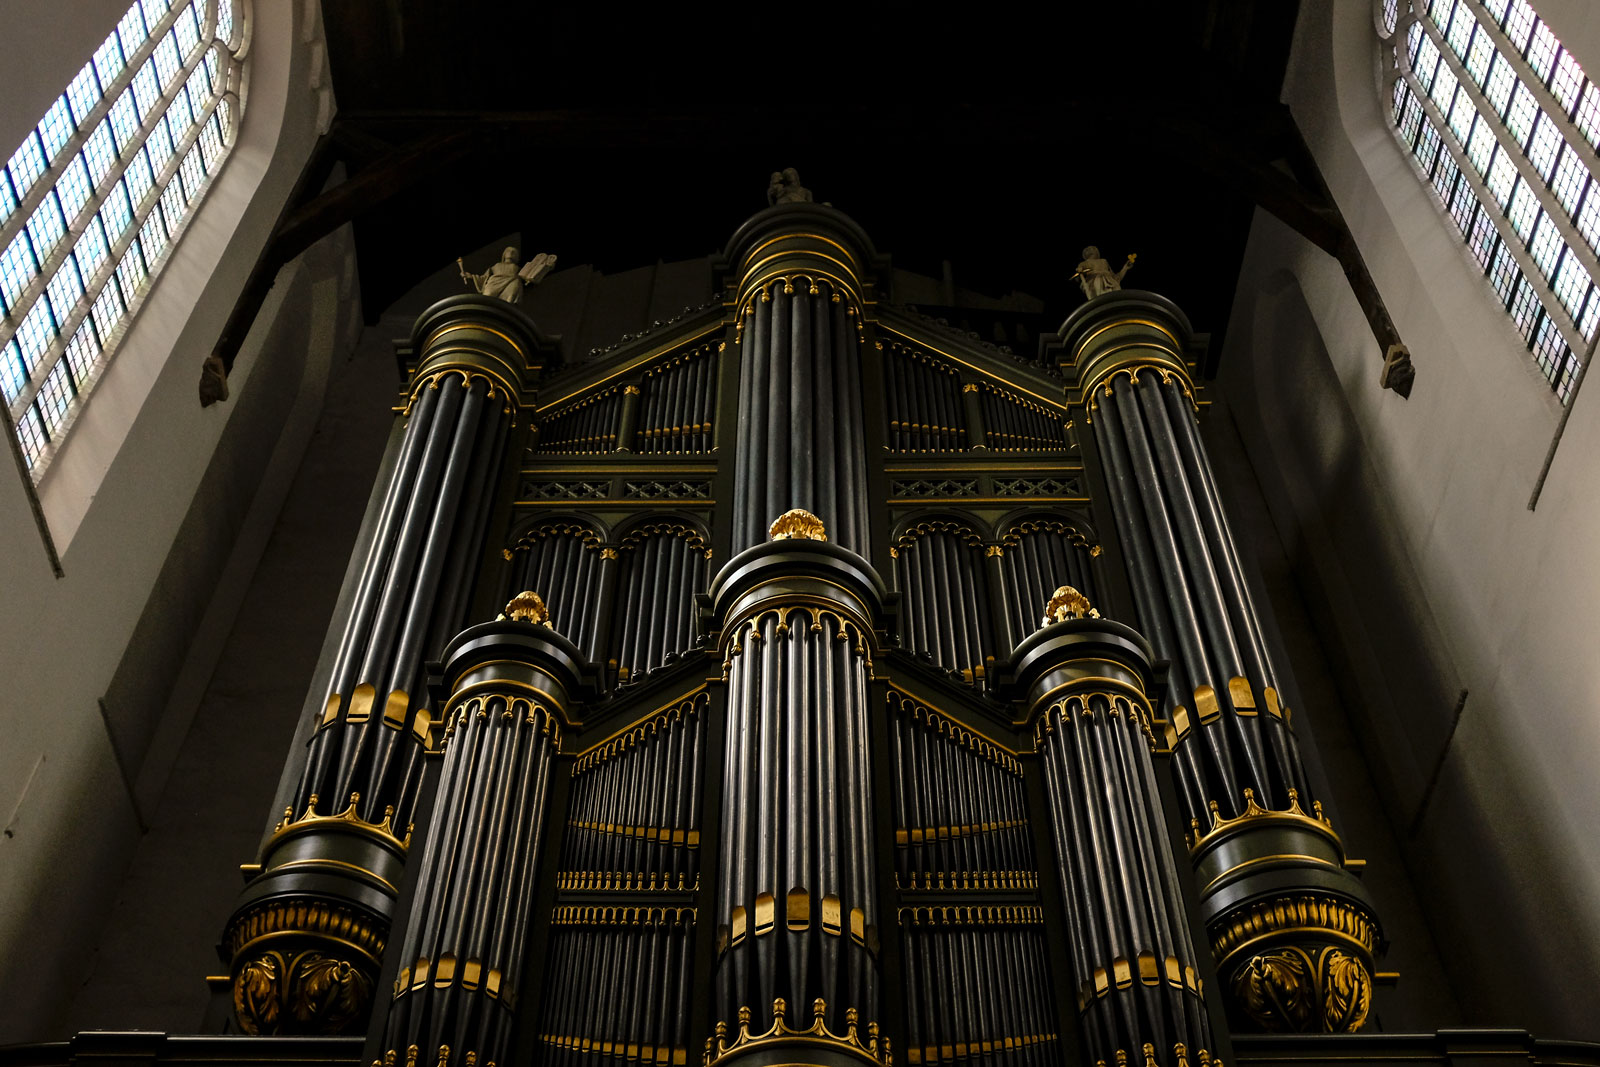 The pipe organ at Delft's Oude Kerk